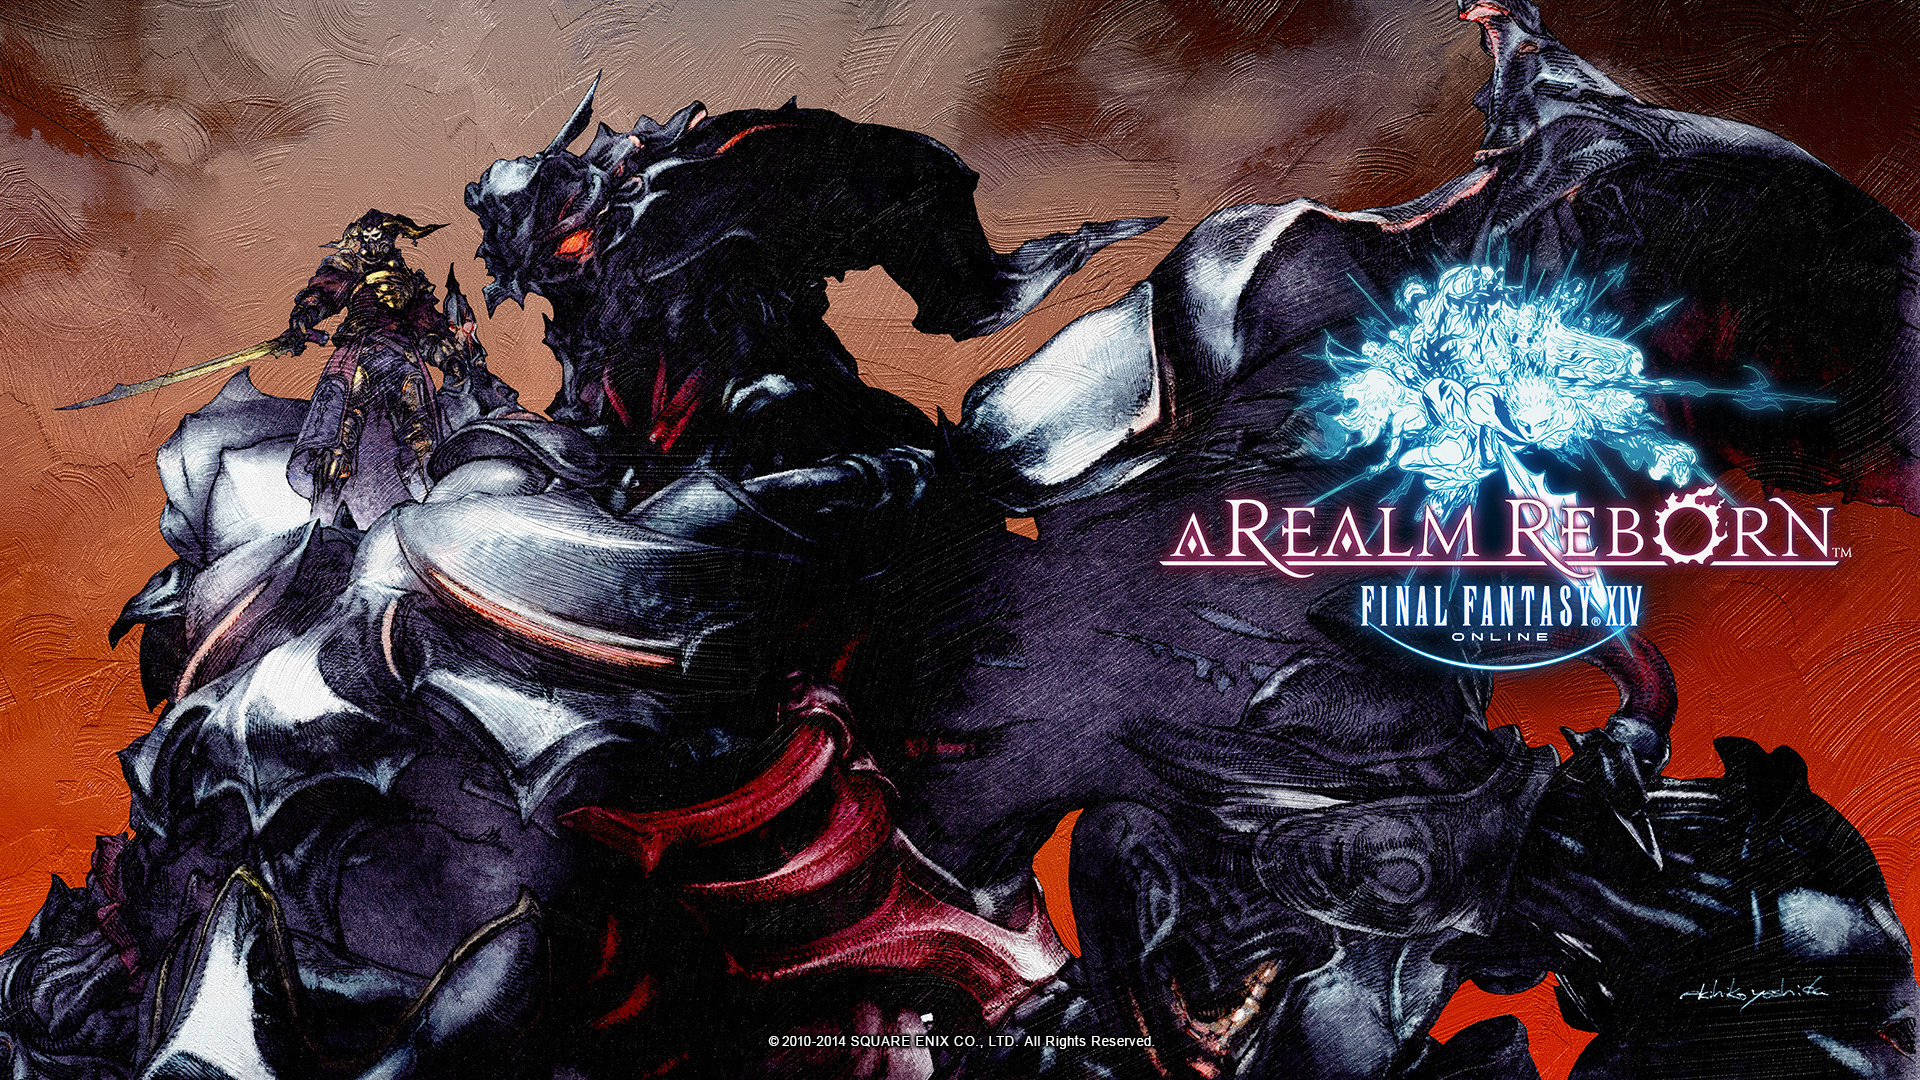 1920x1080 Fantasy XIV: A Realm Reborn Wallpapers Featuring Gaius and Bahamut .